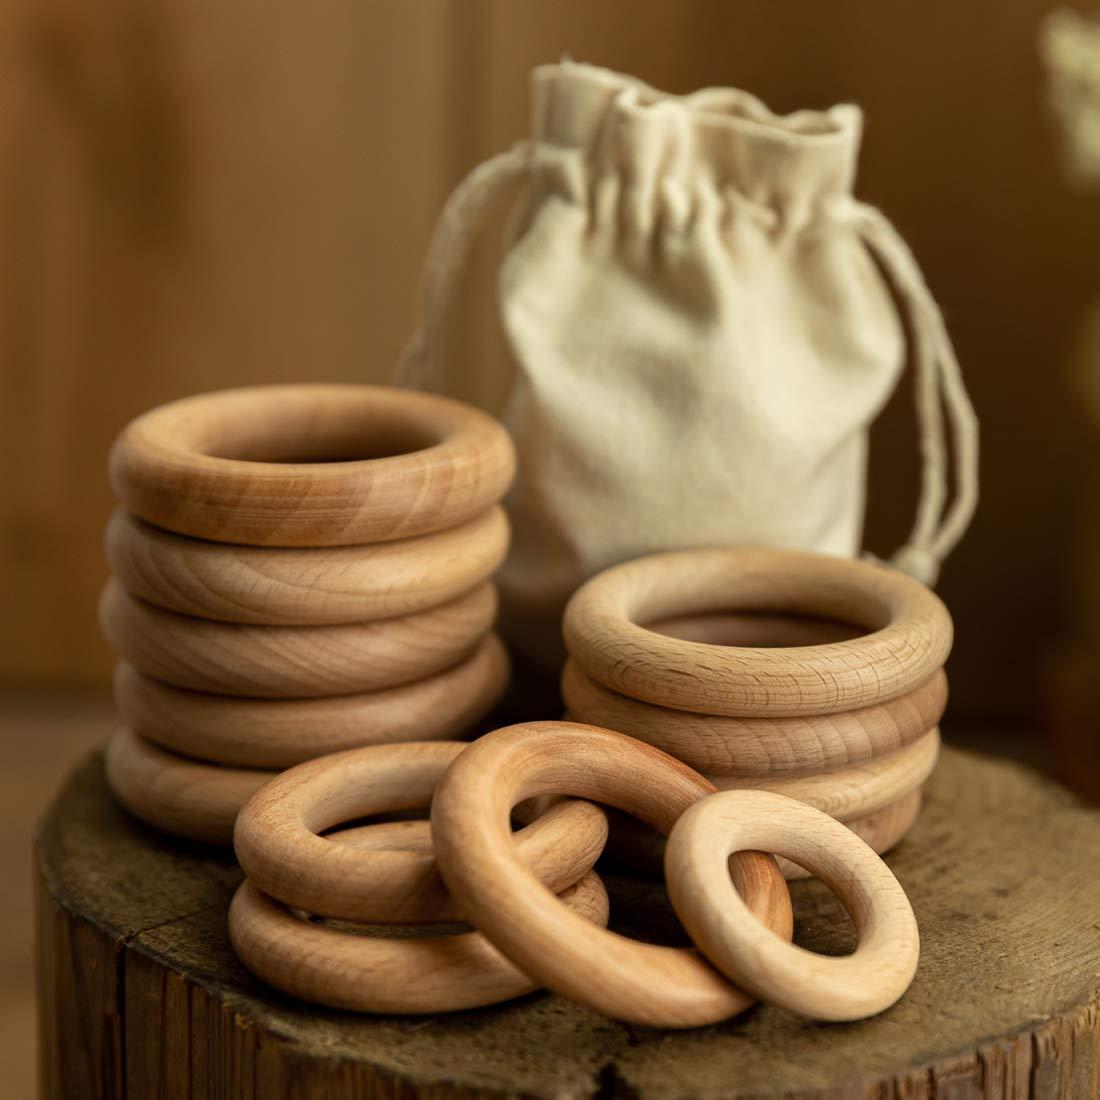 10pcs Wood Rings Wooden Rings for Craft, Ring Pendant and Connectors DIY  Projects